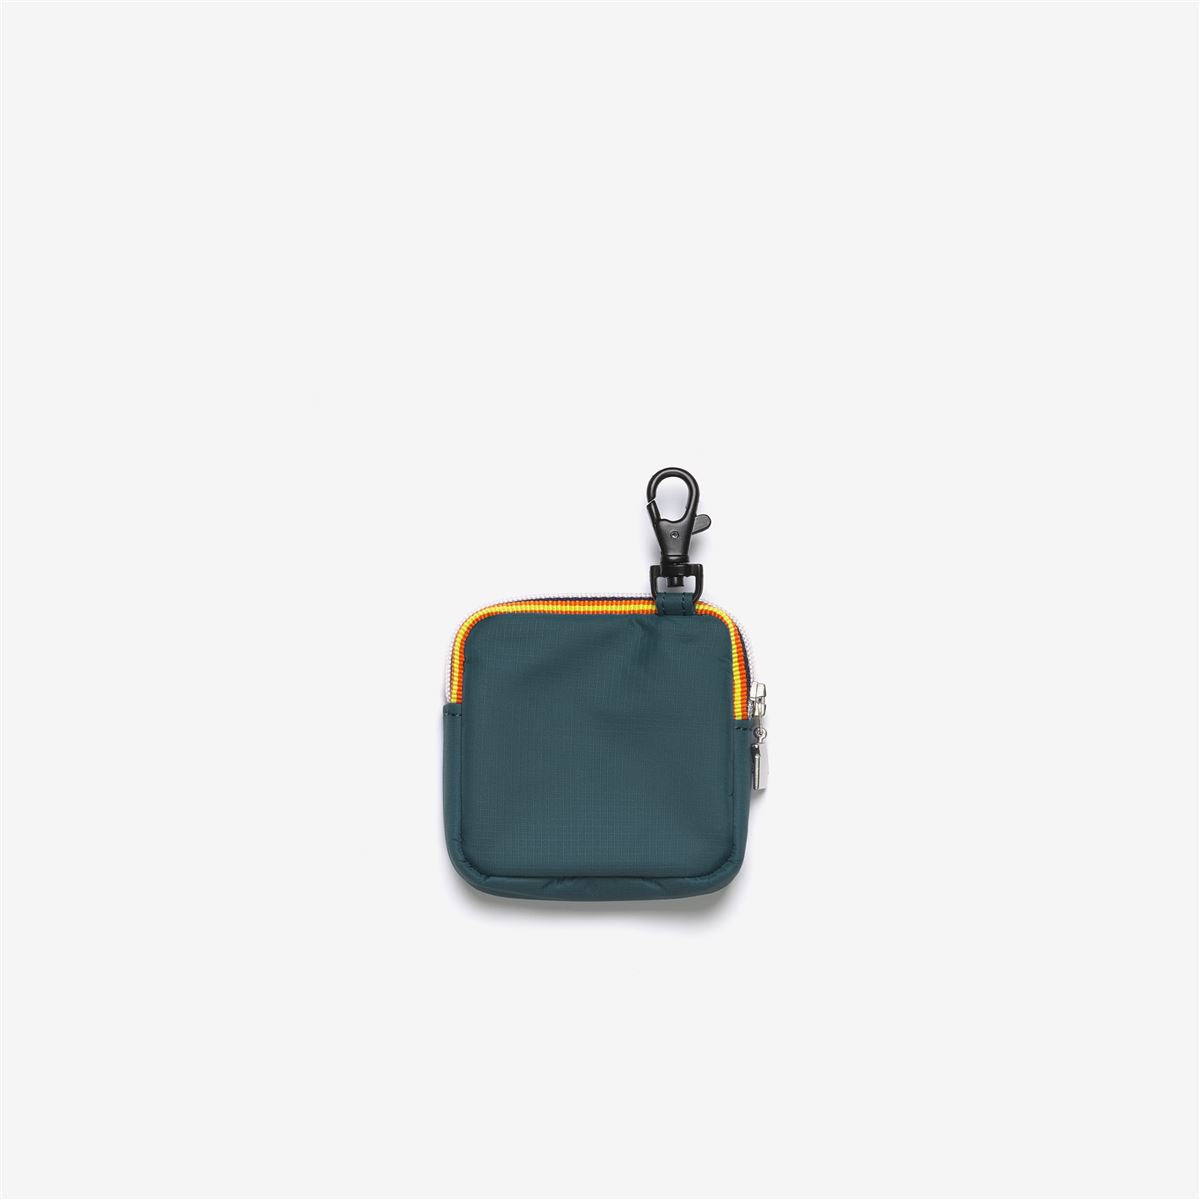 EMEE - SMALL ACCESSORIES - UNISEX - GREEN PETROL